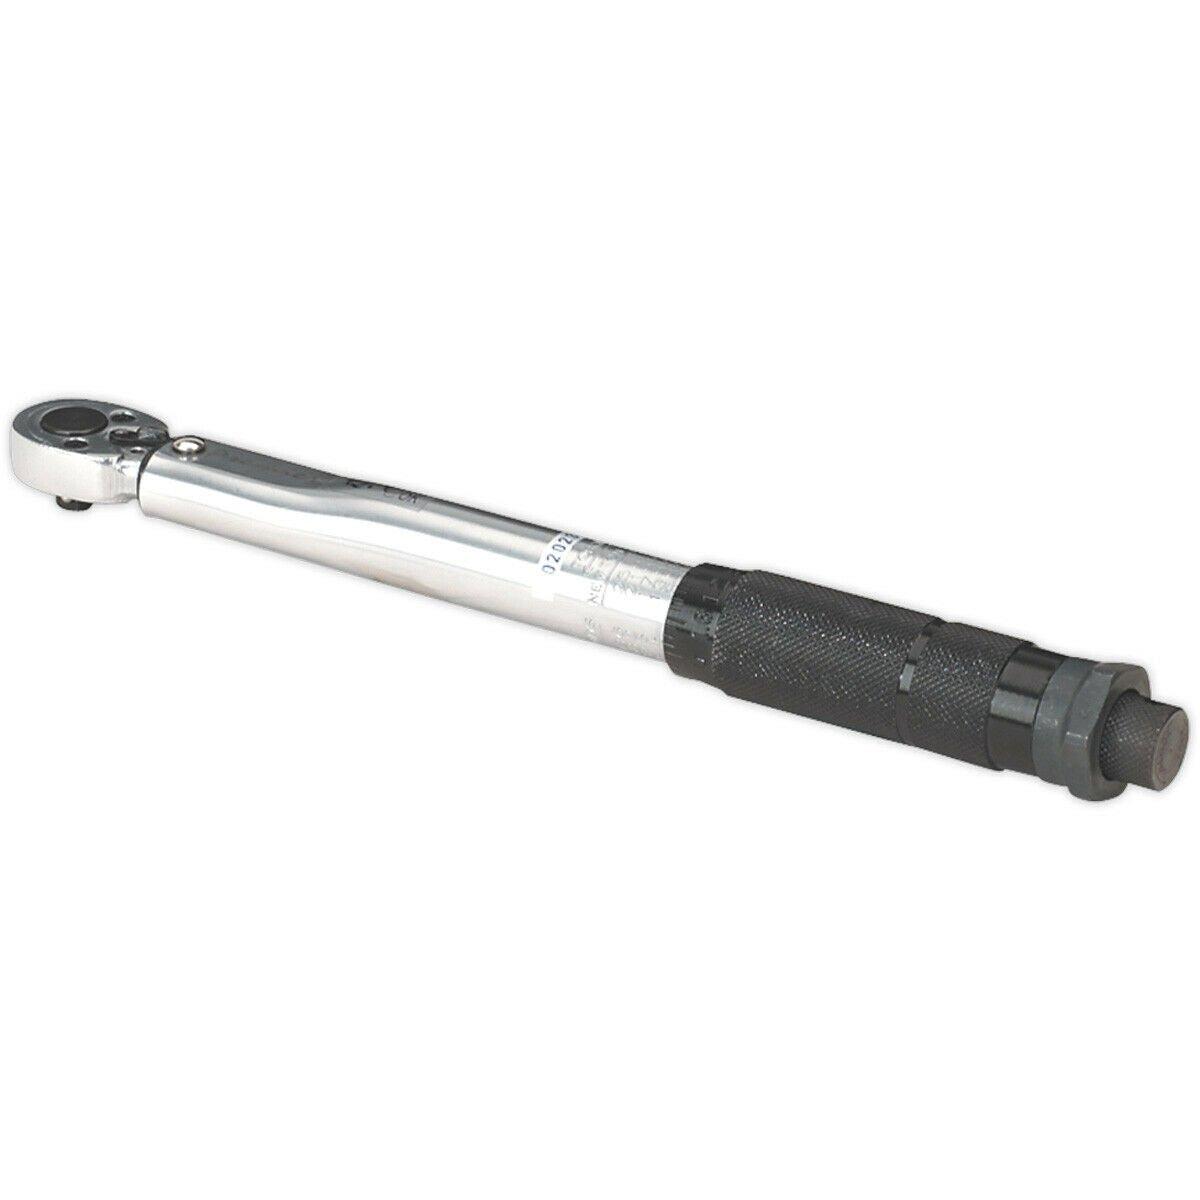 Calibrated Micrometer Style Torque Wrench - 1/4